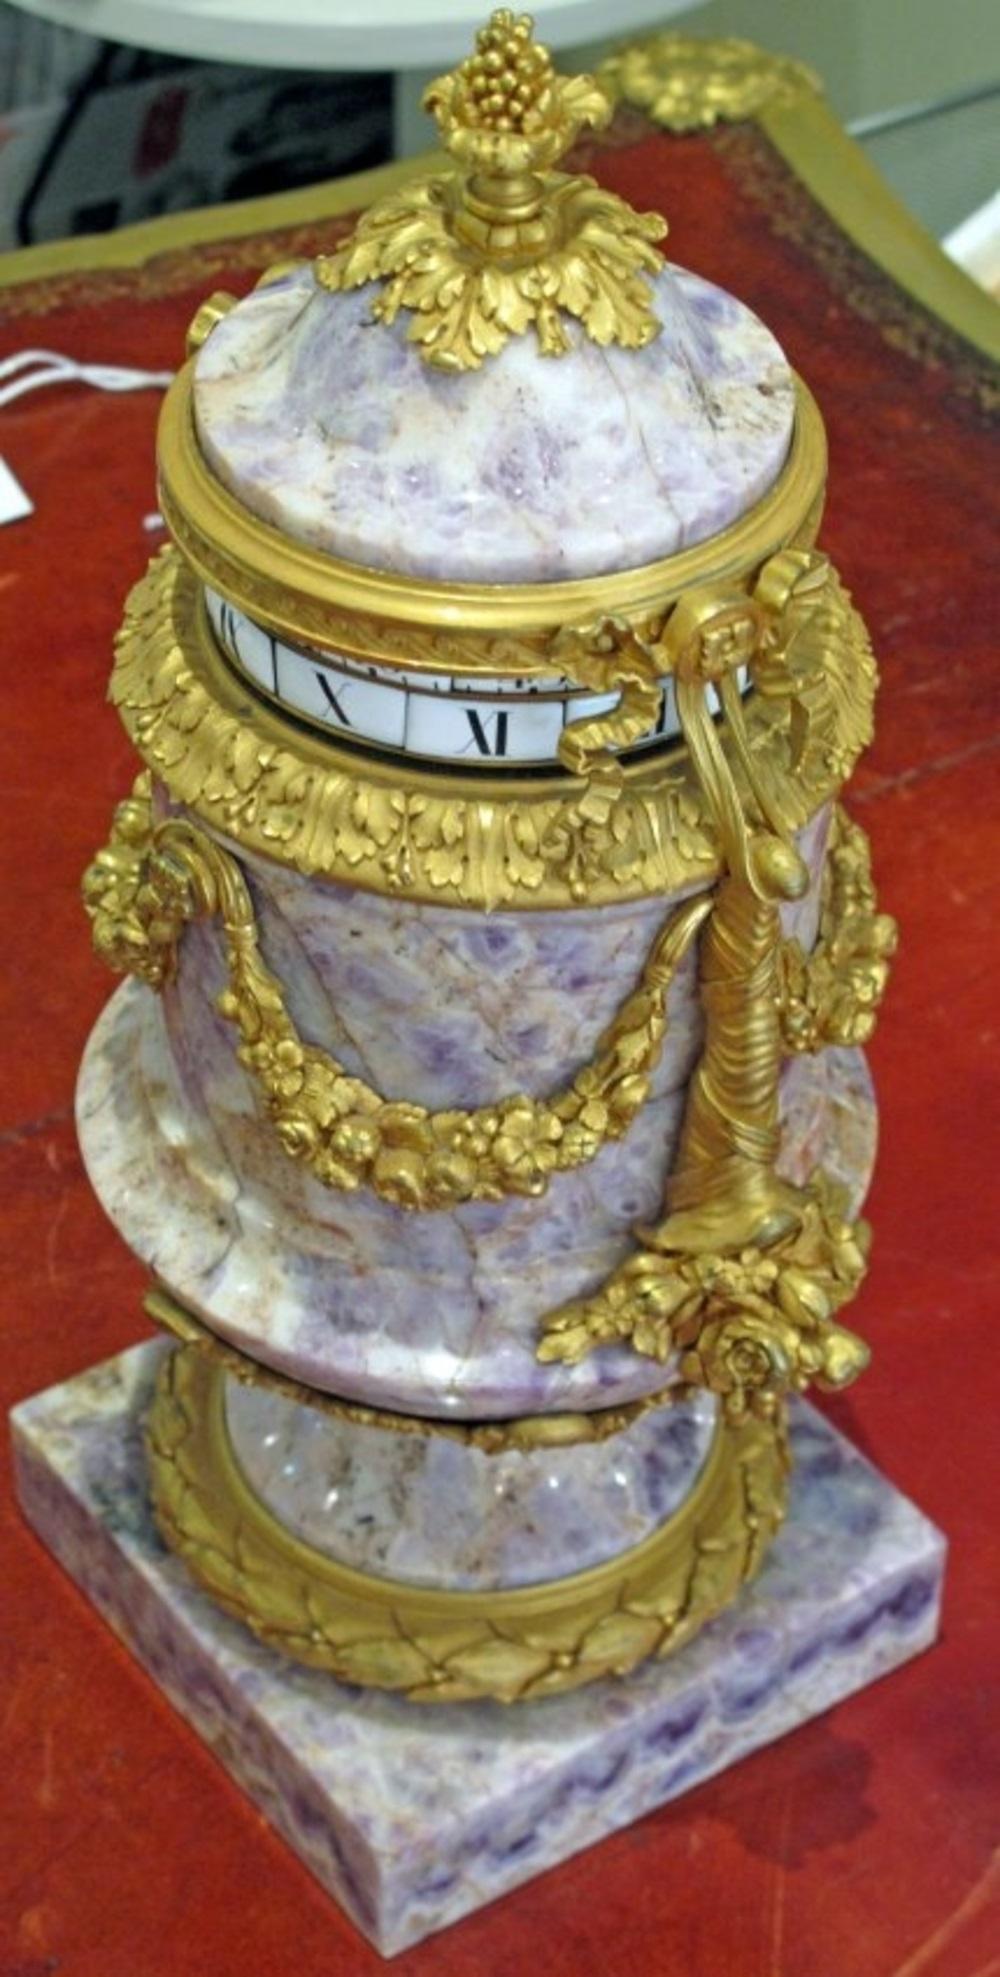 A superb and rare Louis XVI style gilt bronze mounted amethyst rotary clock
French, circa 1885, in the manner of Edward Minart
the urn form clock case with porcelain dials and white enamel chapters flanked by a pair of handles with a laurel swag